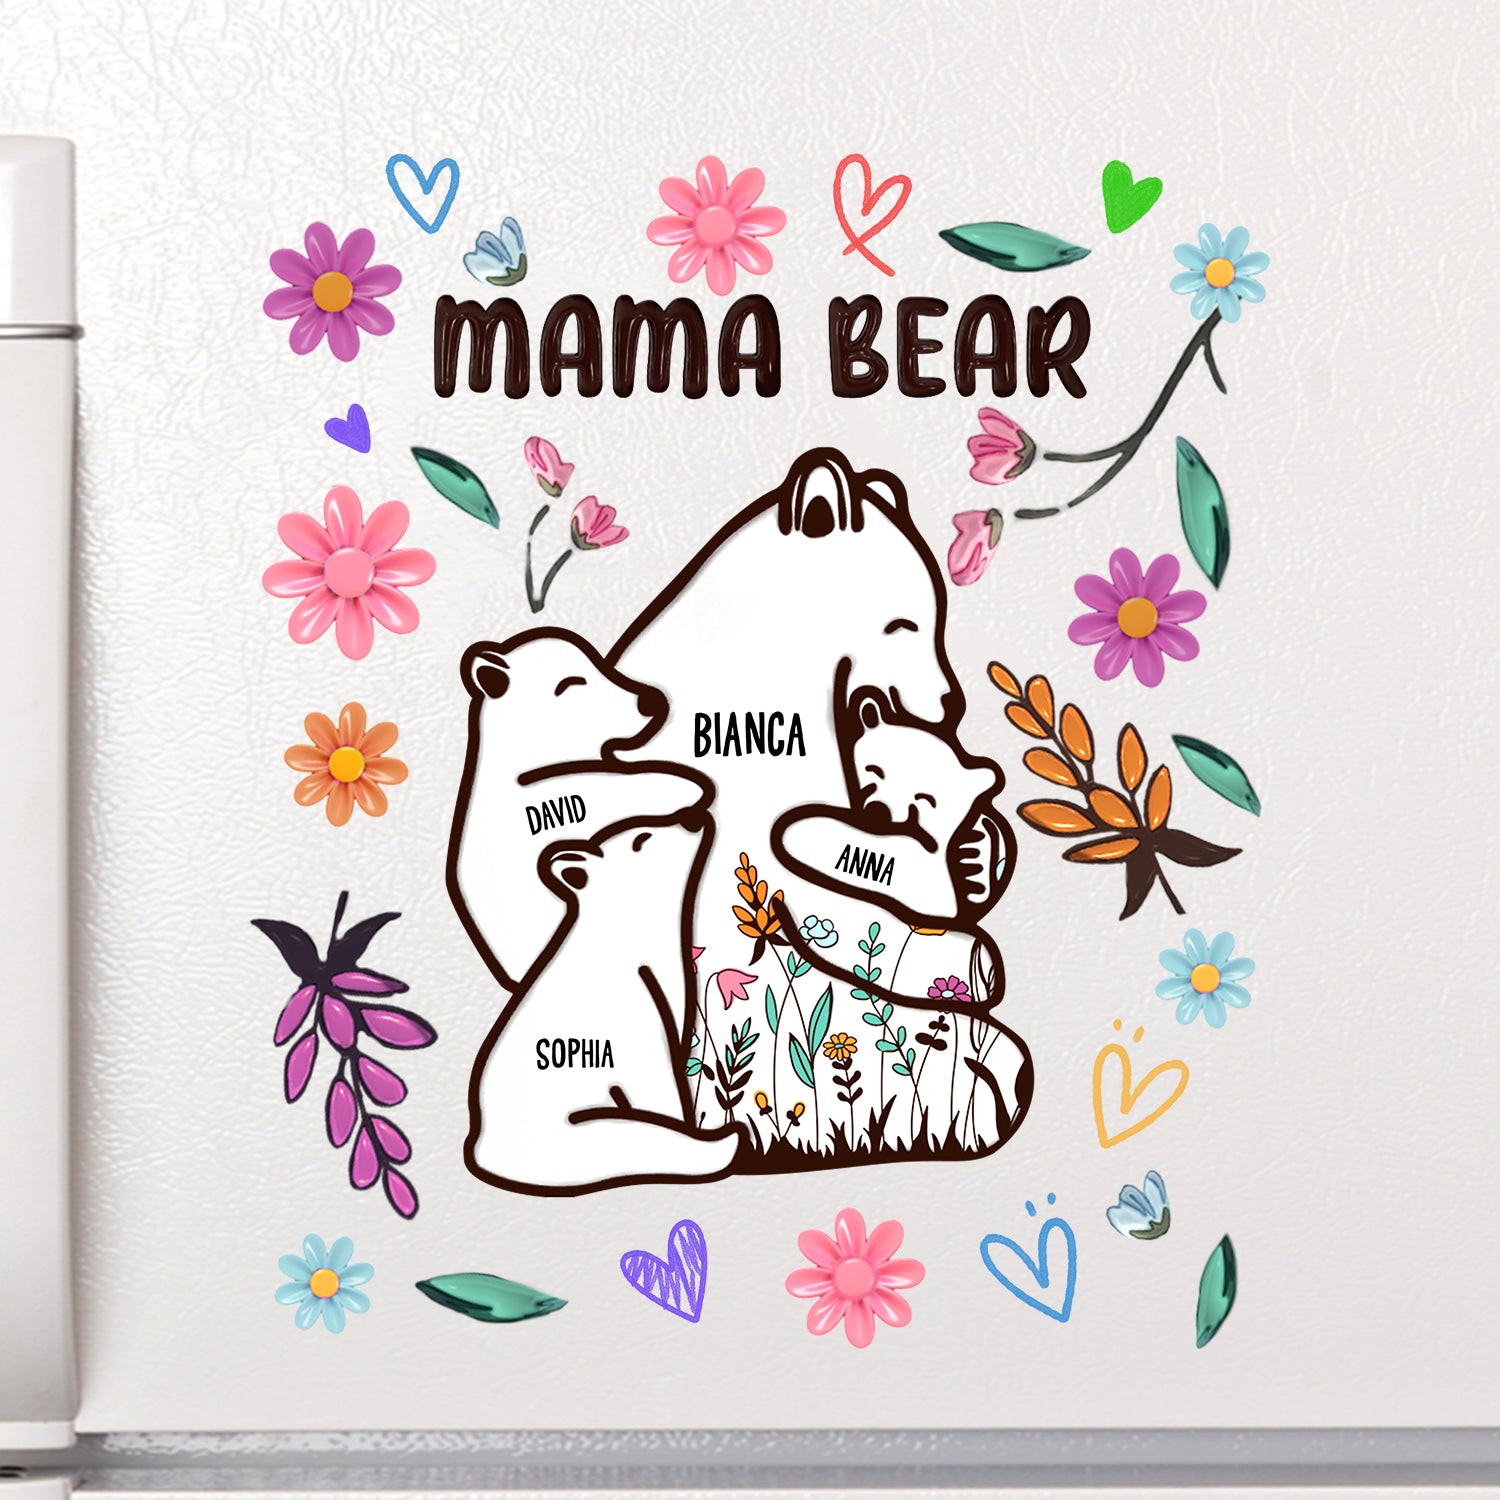 Mama Bear Floral Style - Birthday, Loving Gift For Mom, Mother, Grandma, Grandmother - Personalized Decor Decal